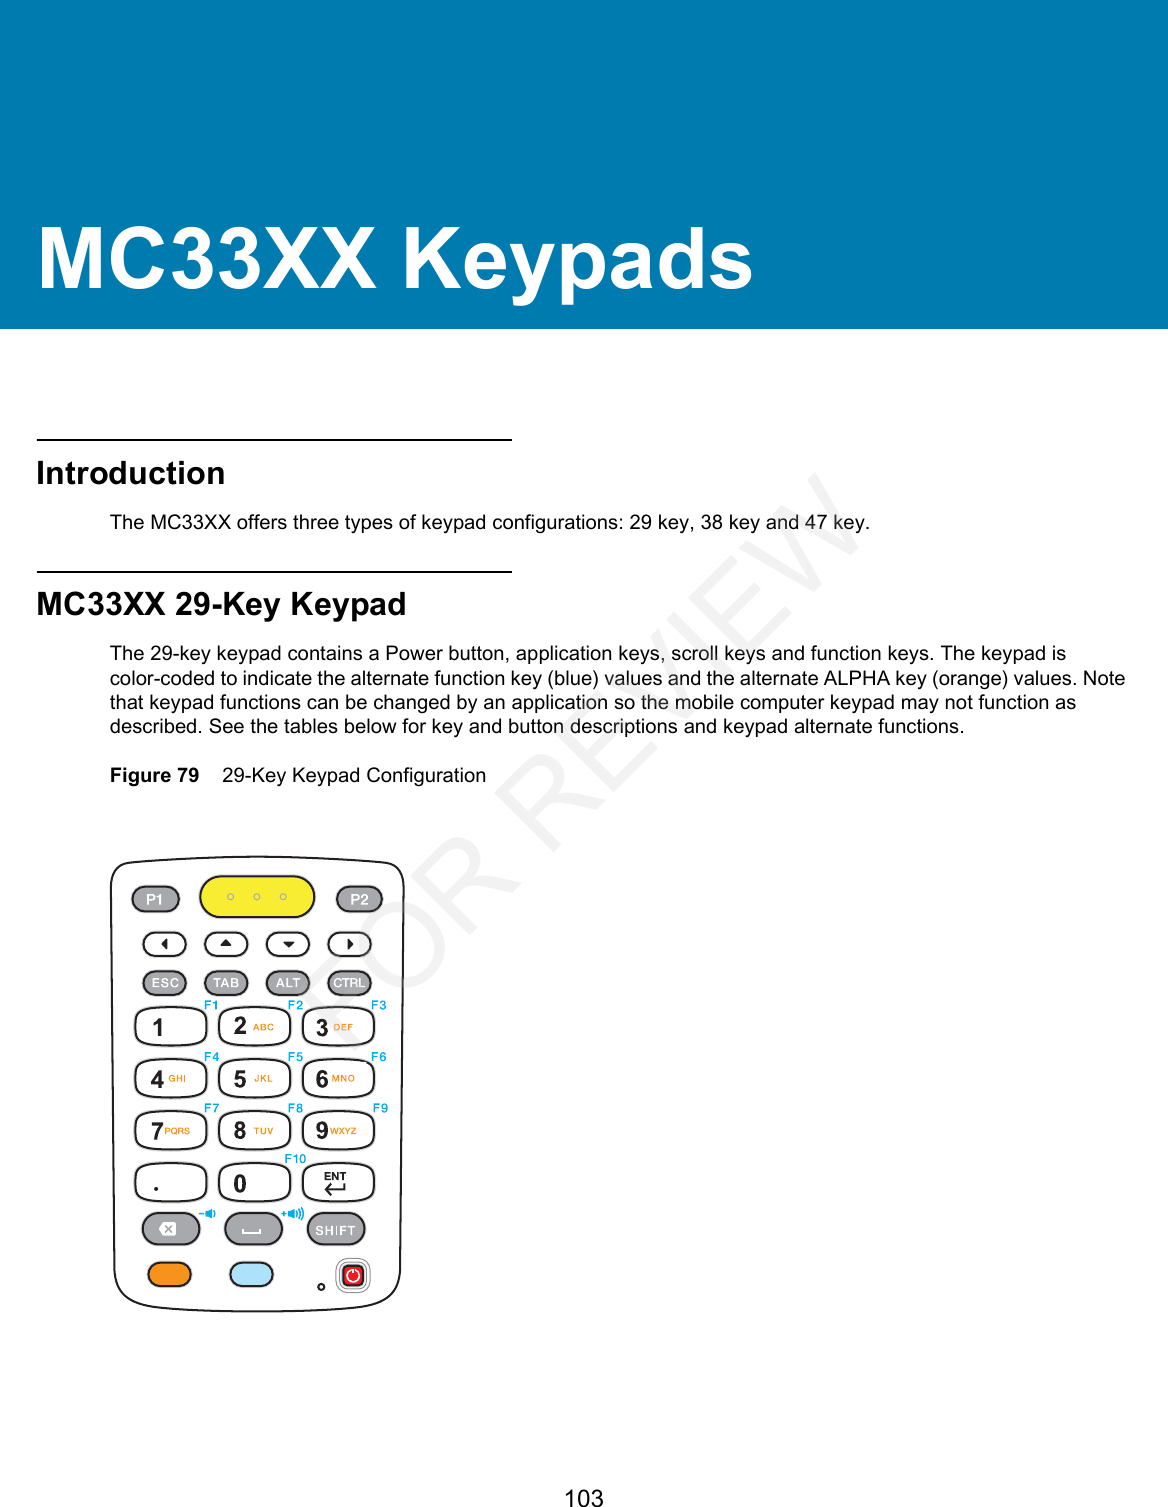 103MC33XX KeypadsIntroductionThe MC33XX offers three types of keypad configurations: 29 key, 38 key and 47 key.MC33XX 29-Key KeypadThe 29-key keypad contains a Power button, application keys, scroll keys and function keys. The keypad is color-coded to indicate the alternate function key (blue) values and the alternate ALPHA key (orange) values. Note that keypad functions can be changed by an application so the mobile computer keypad may not function as described. See the tables below for key and button descriptions and keypad alternate functions.Figure 79    29-Key Keypad ConfigurationFOR REVIEW